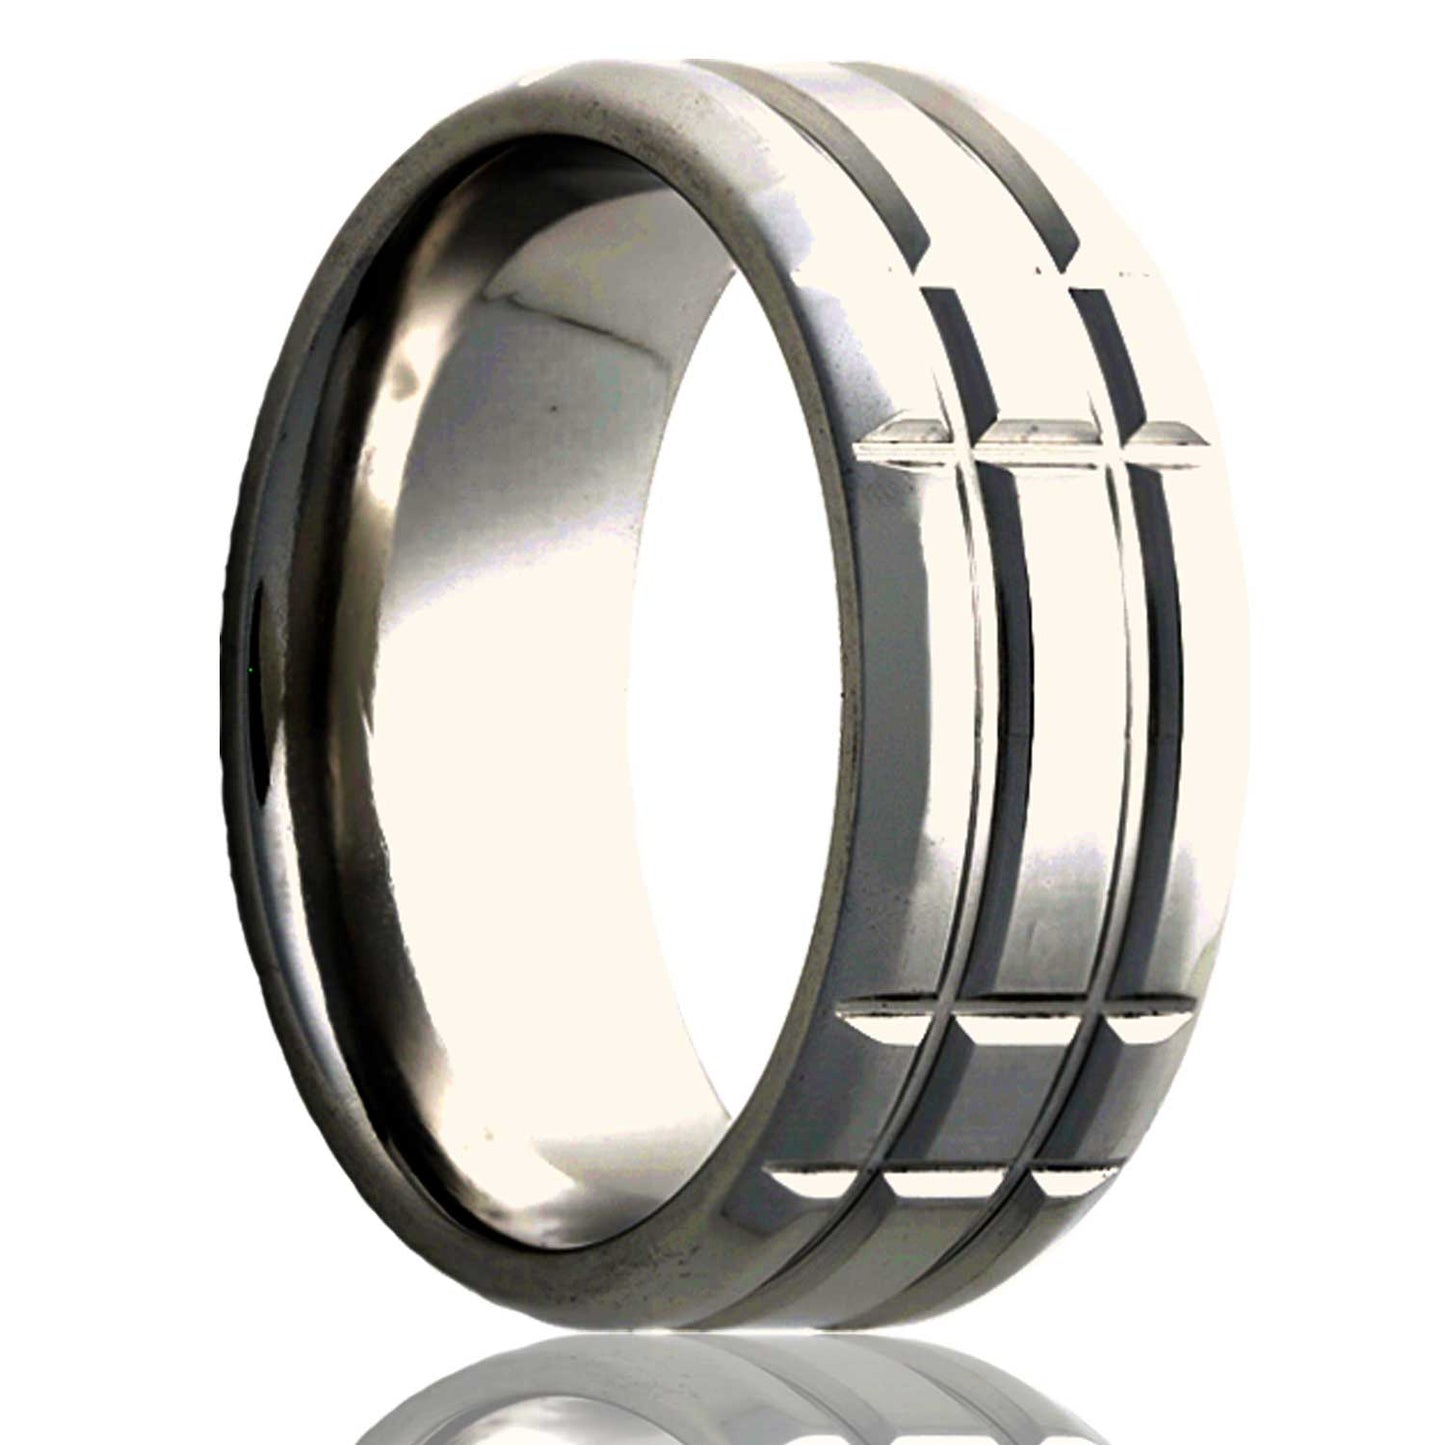 A intersecting grooves cobalt wedding band with beveled edges displayed on a neutral white background.